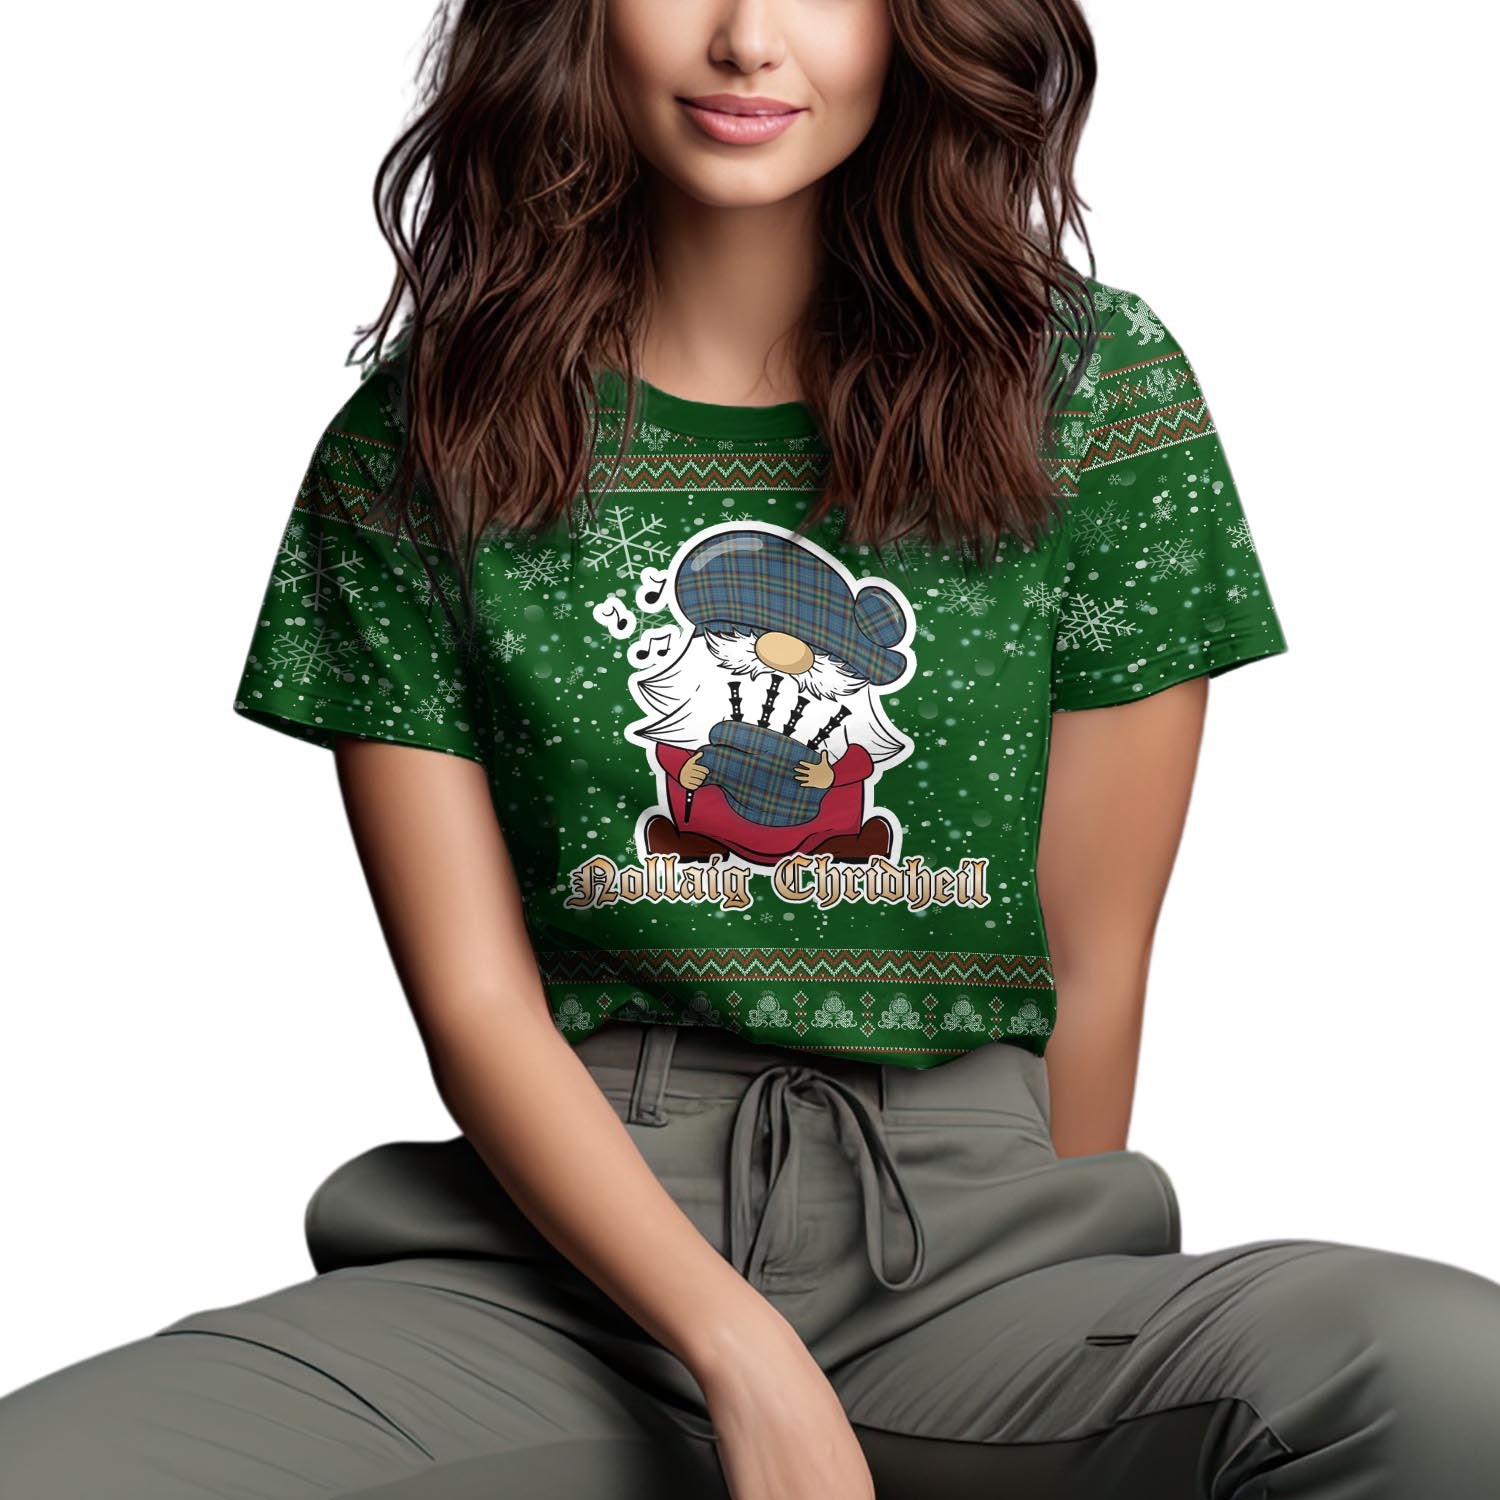 Ralston UK Clan Christmas Family T-Shirt with Funny Gnome Playing Bagpipes Women's Shirt Green - Tartanvibesclothing